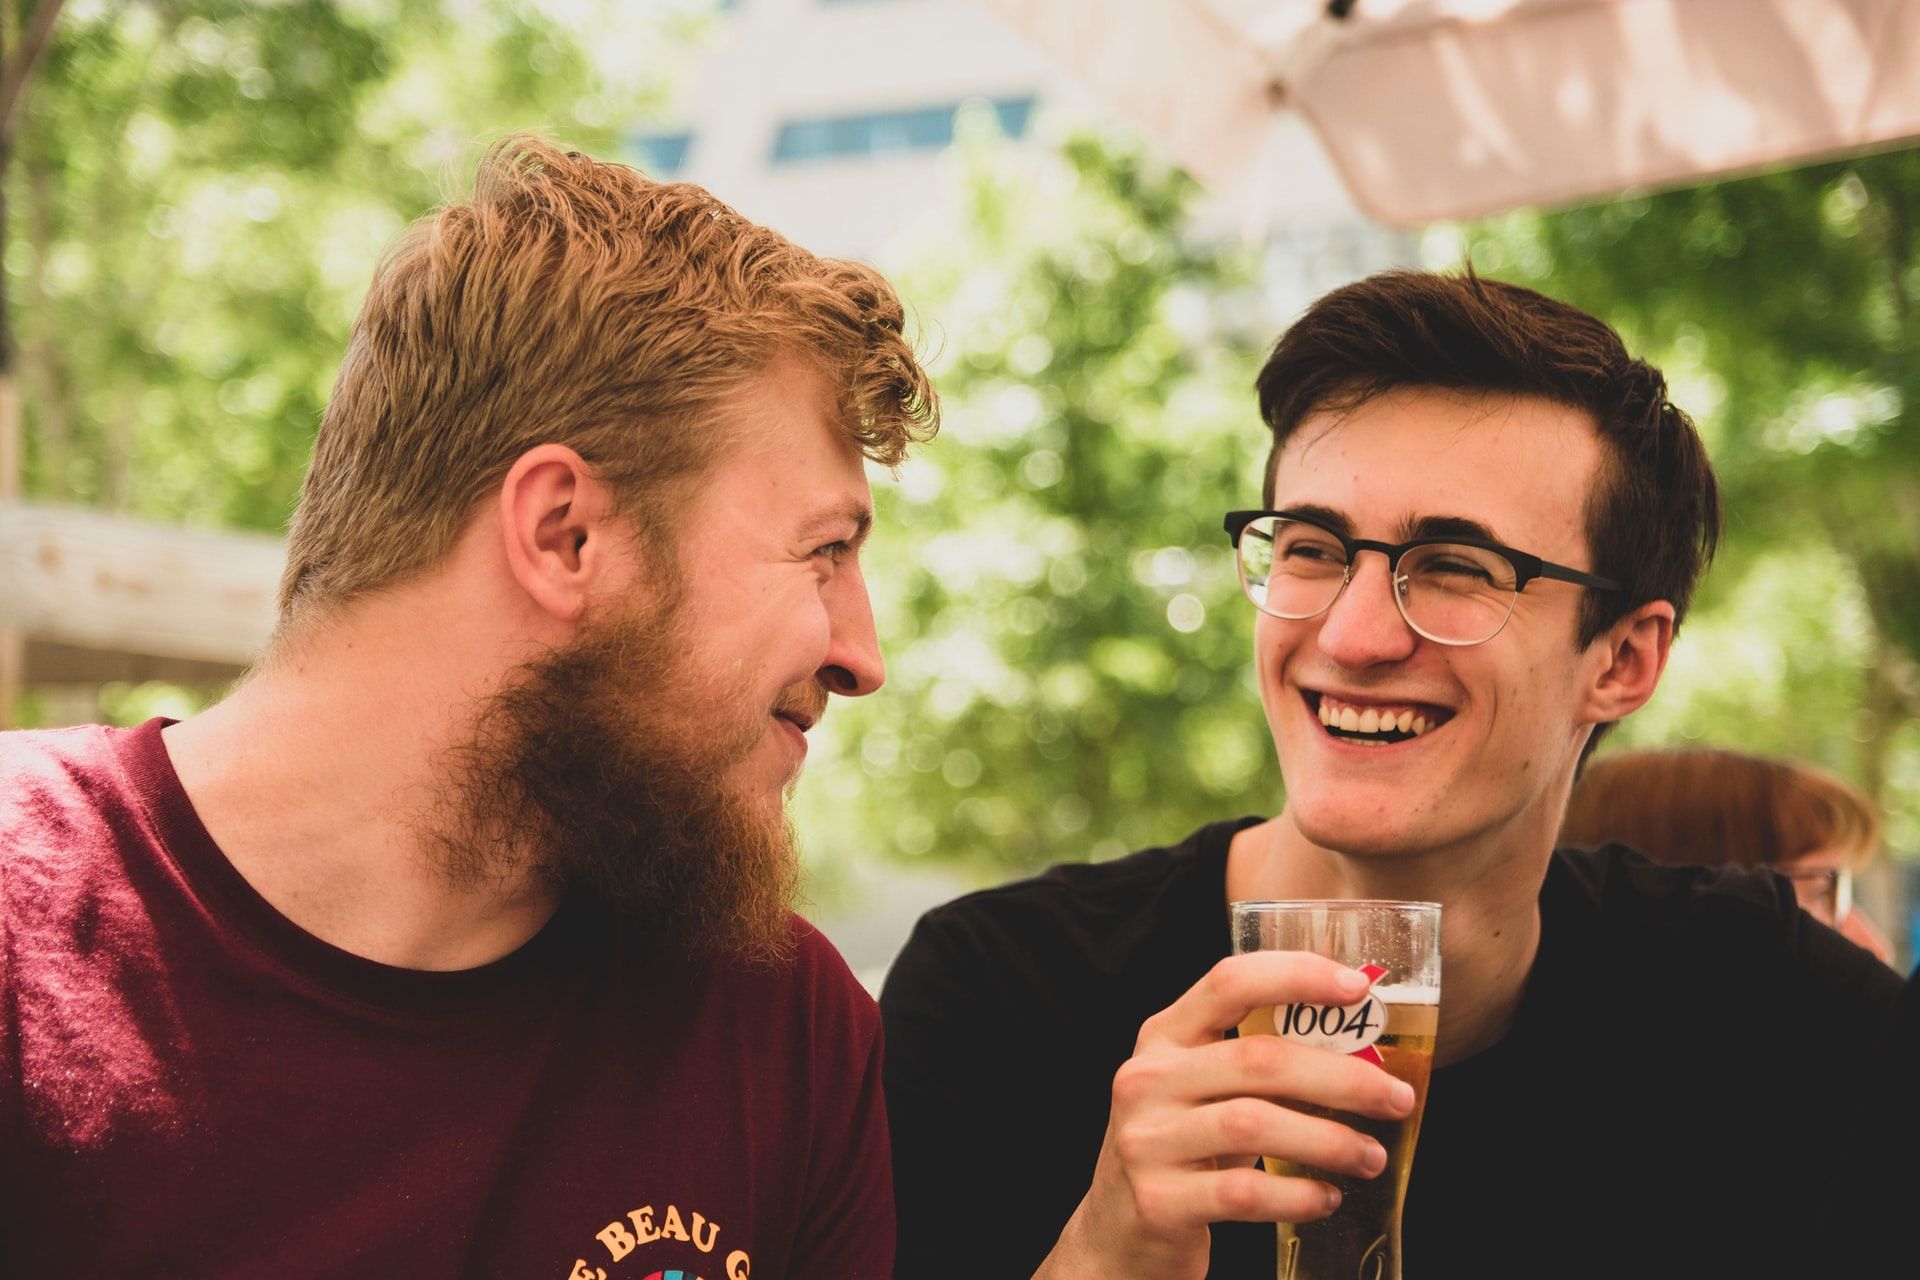 Two young men talking over a beer.